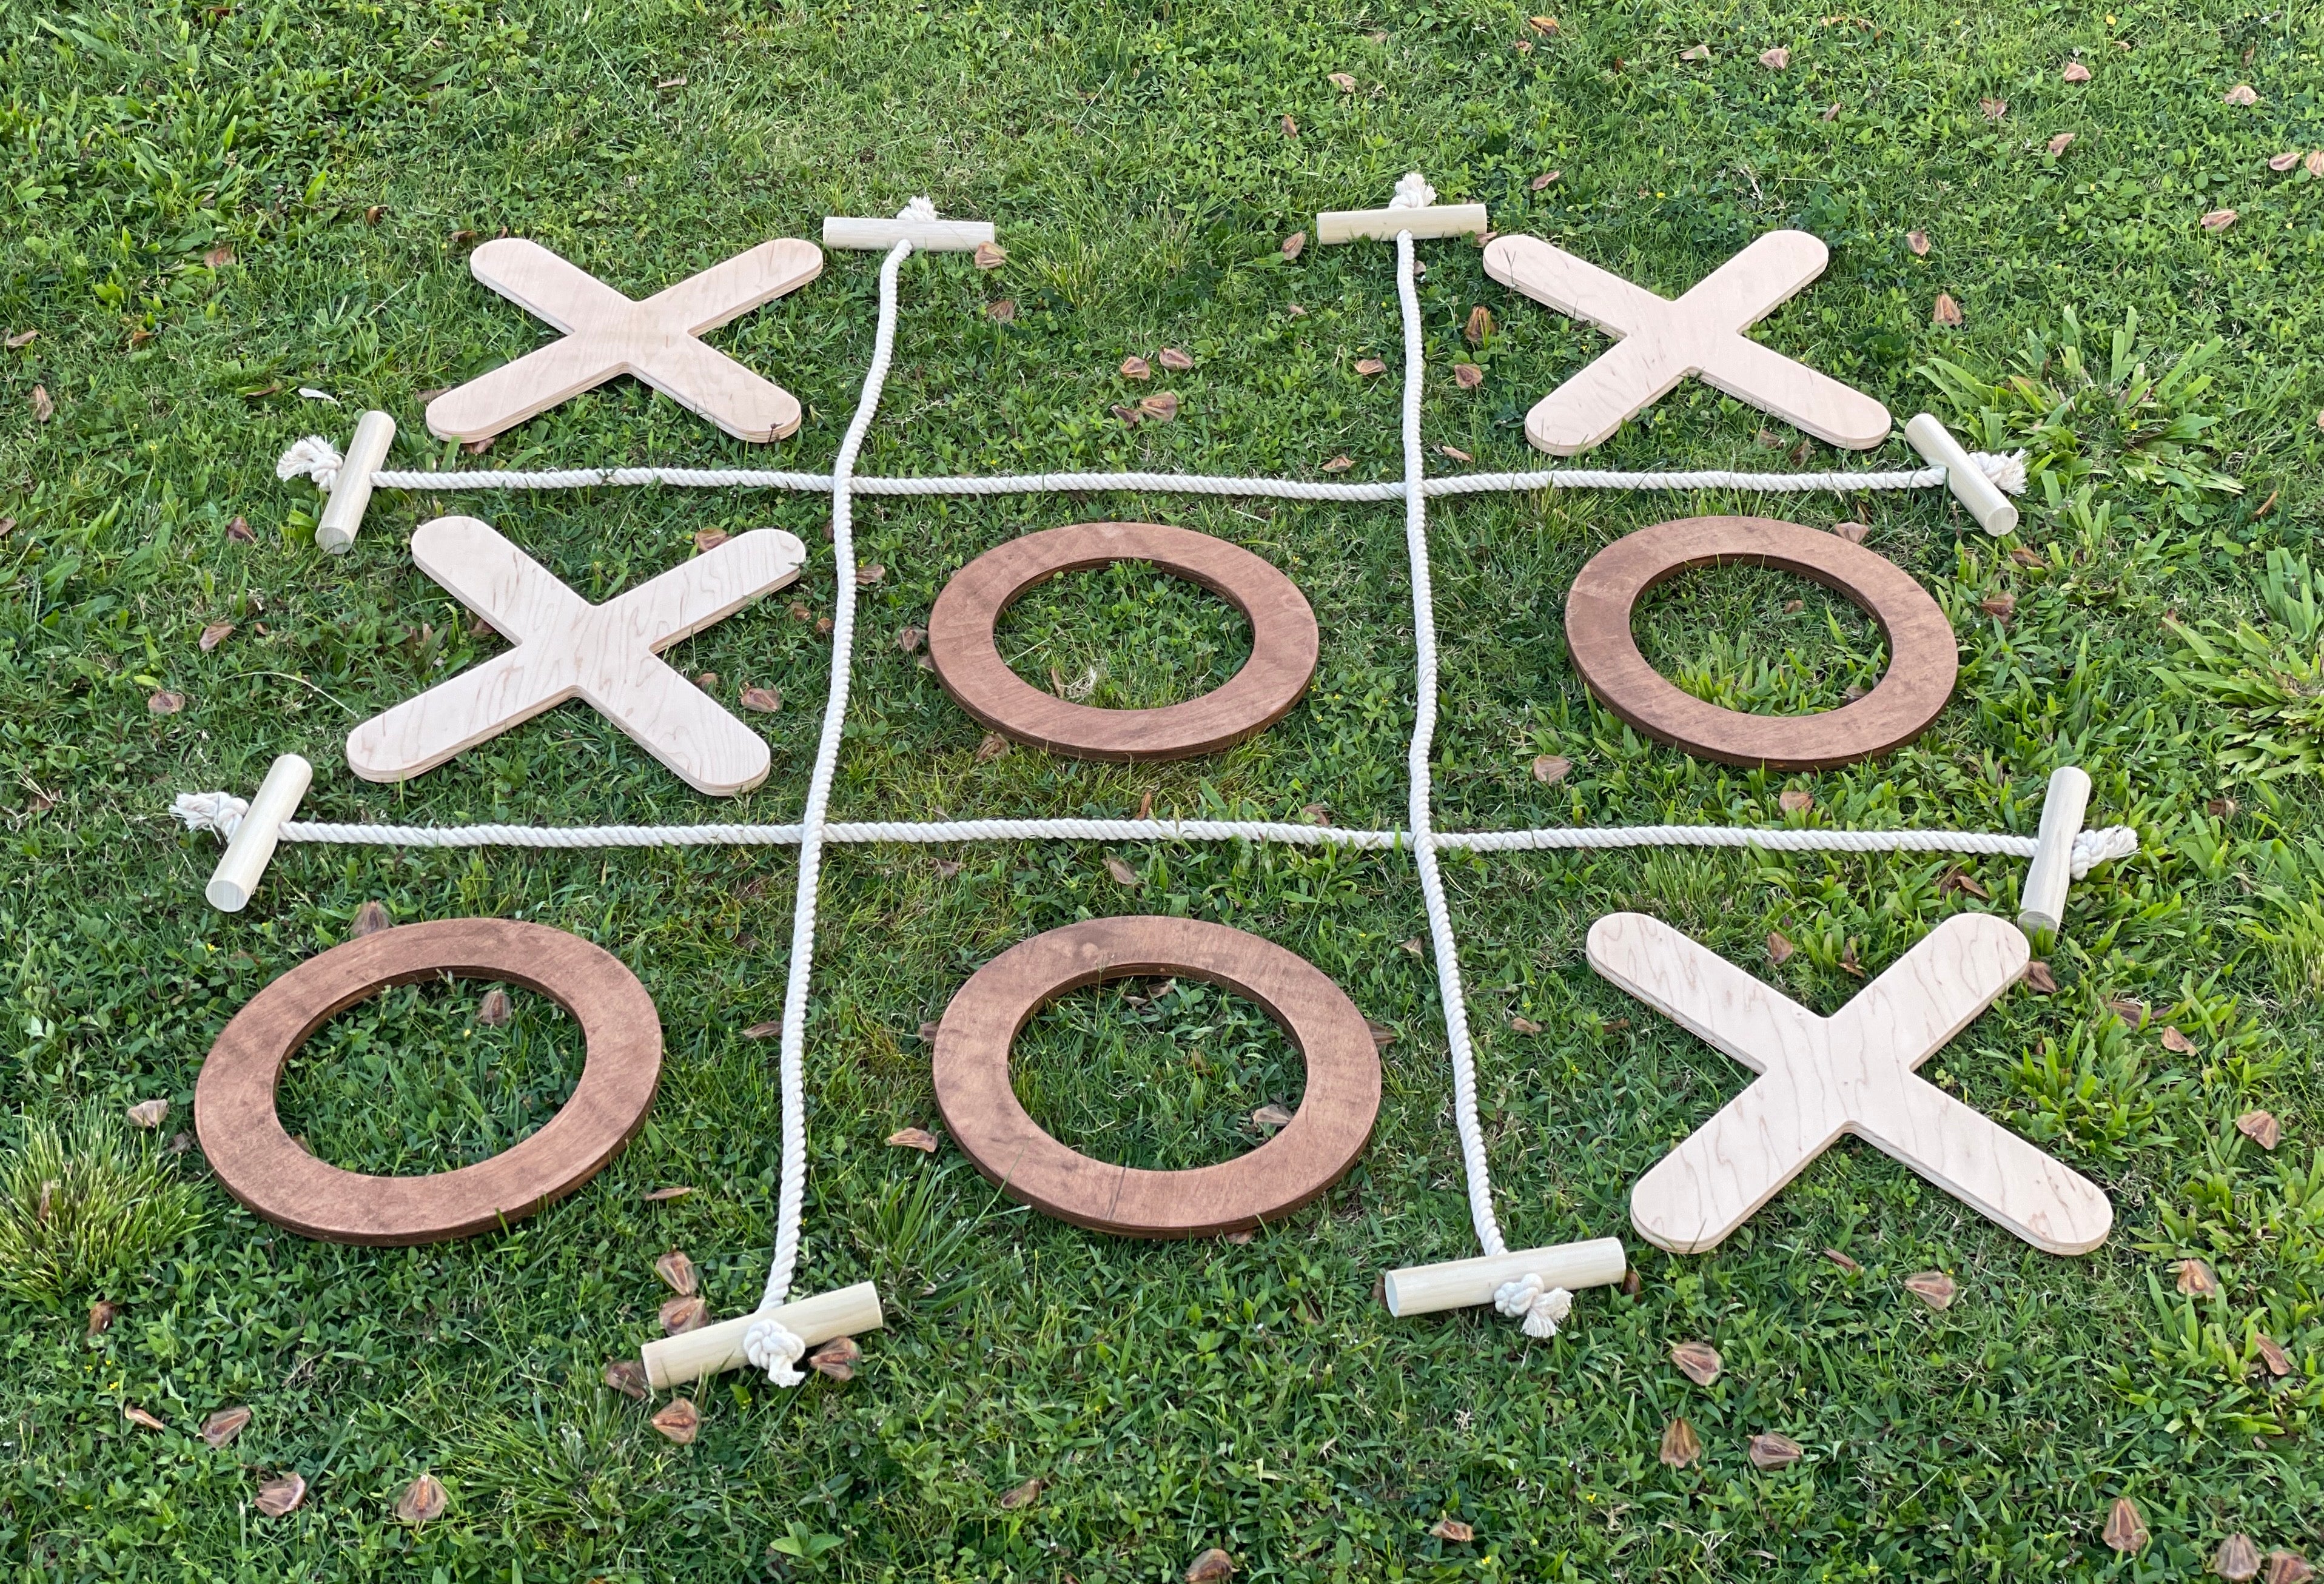 YardGames Outdoor Wood Tic-tac-toe with Case in the Party Games